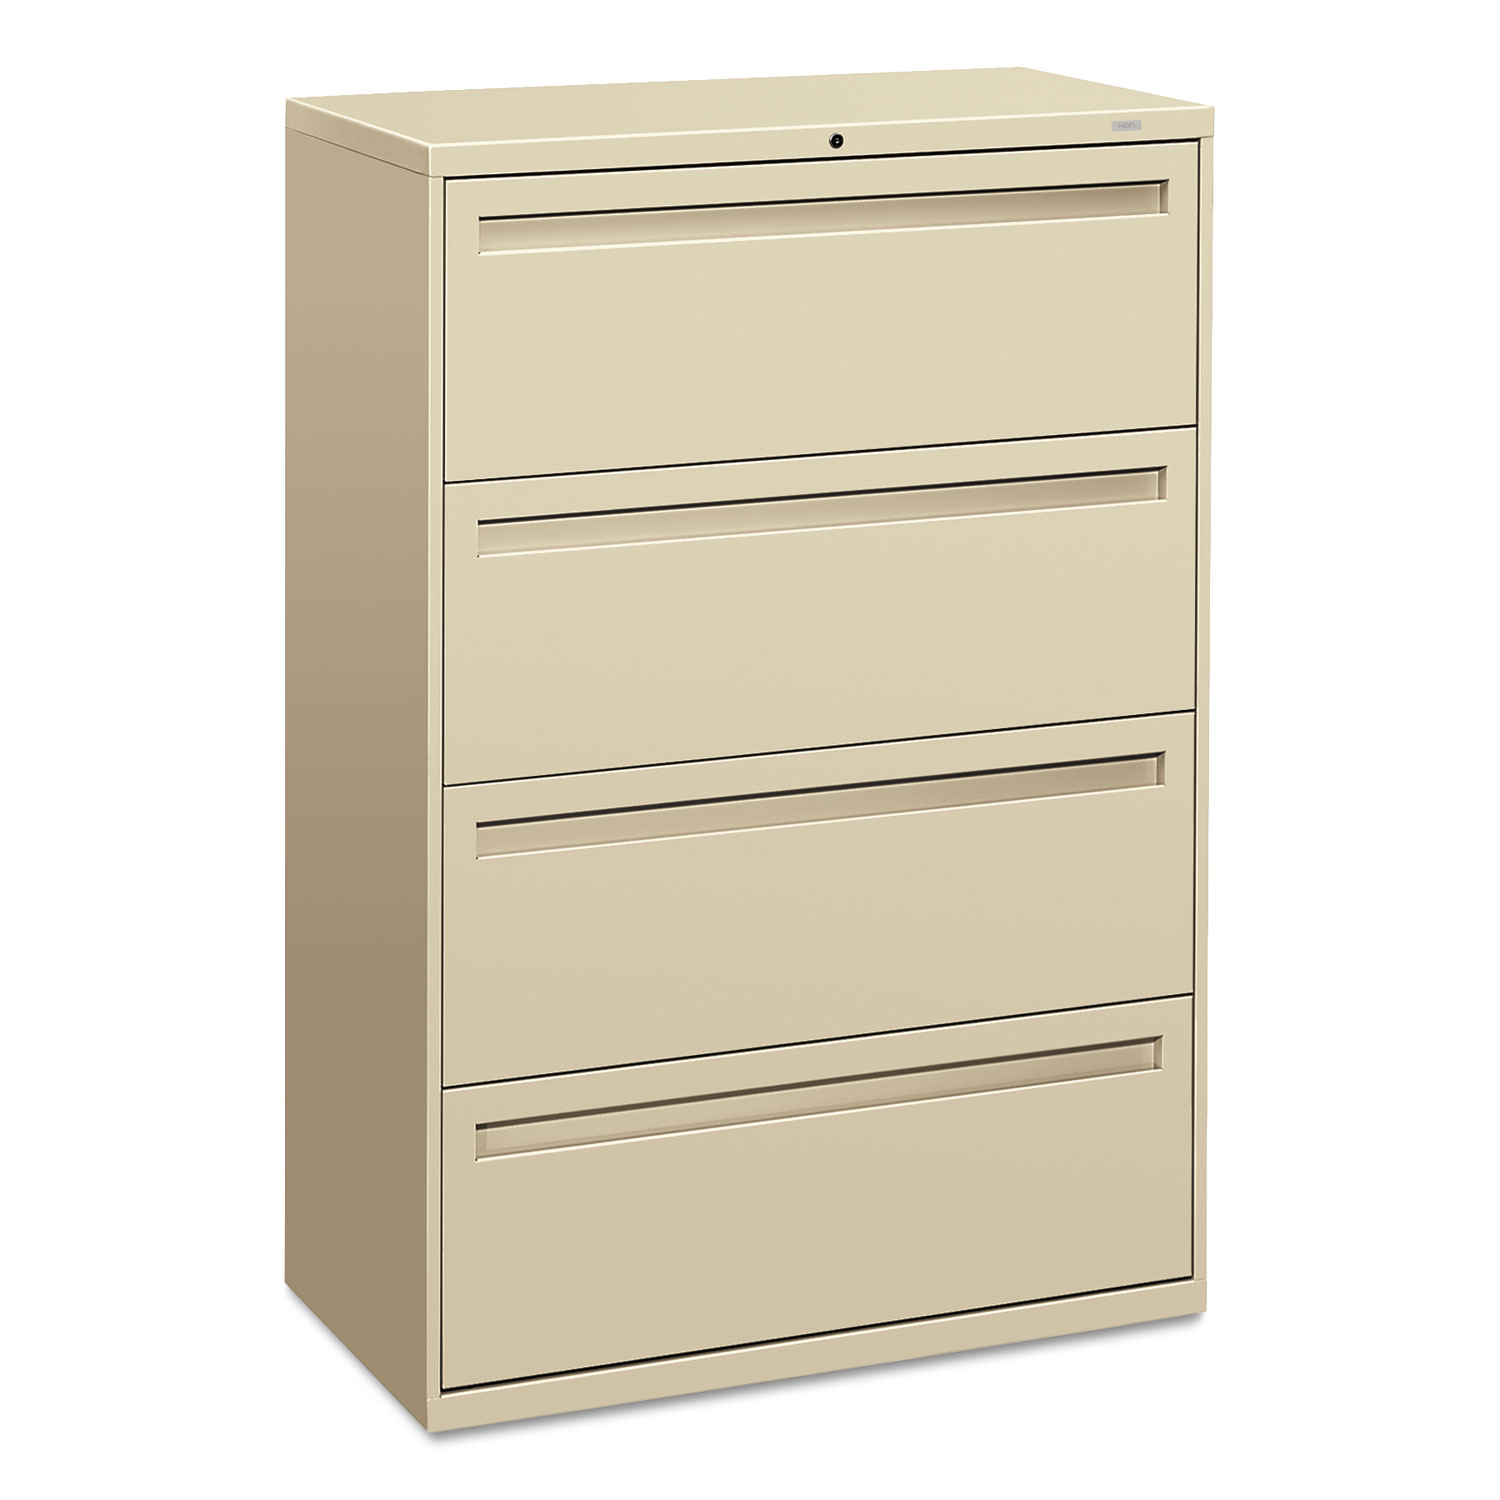 700 Series Four-Drawer Lateral File, 36w x 18d x 52 1/2h, Putty